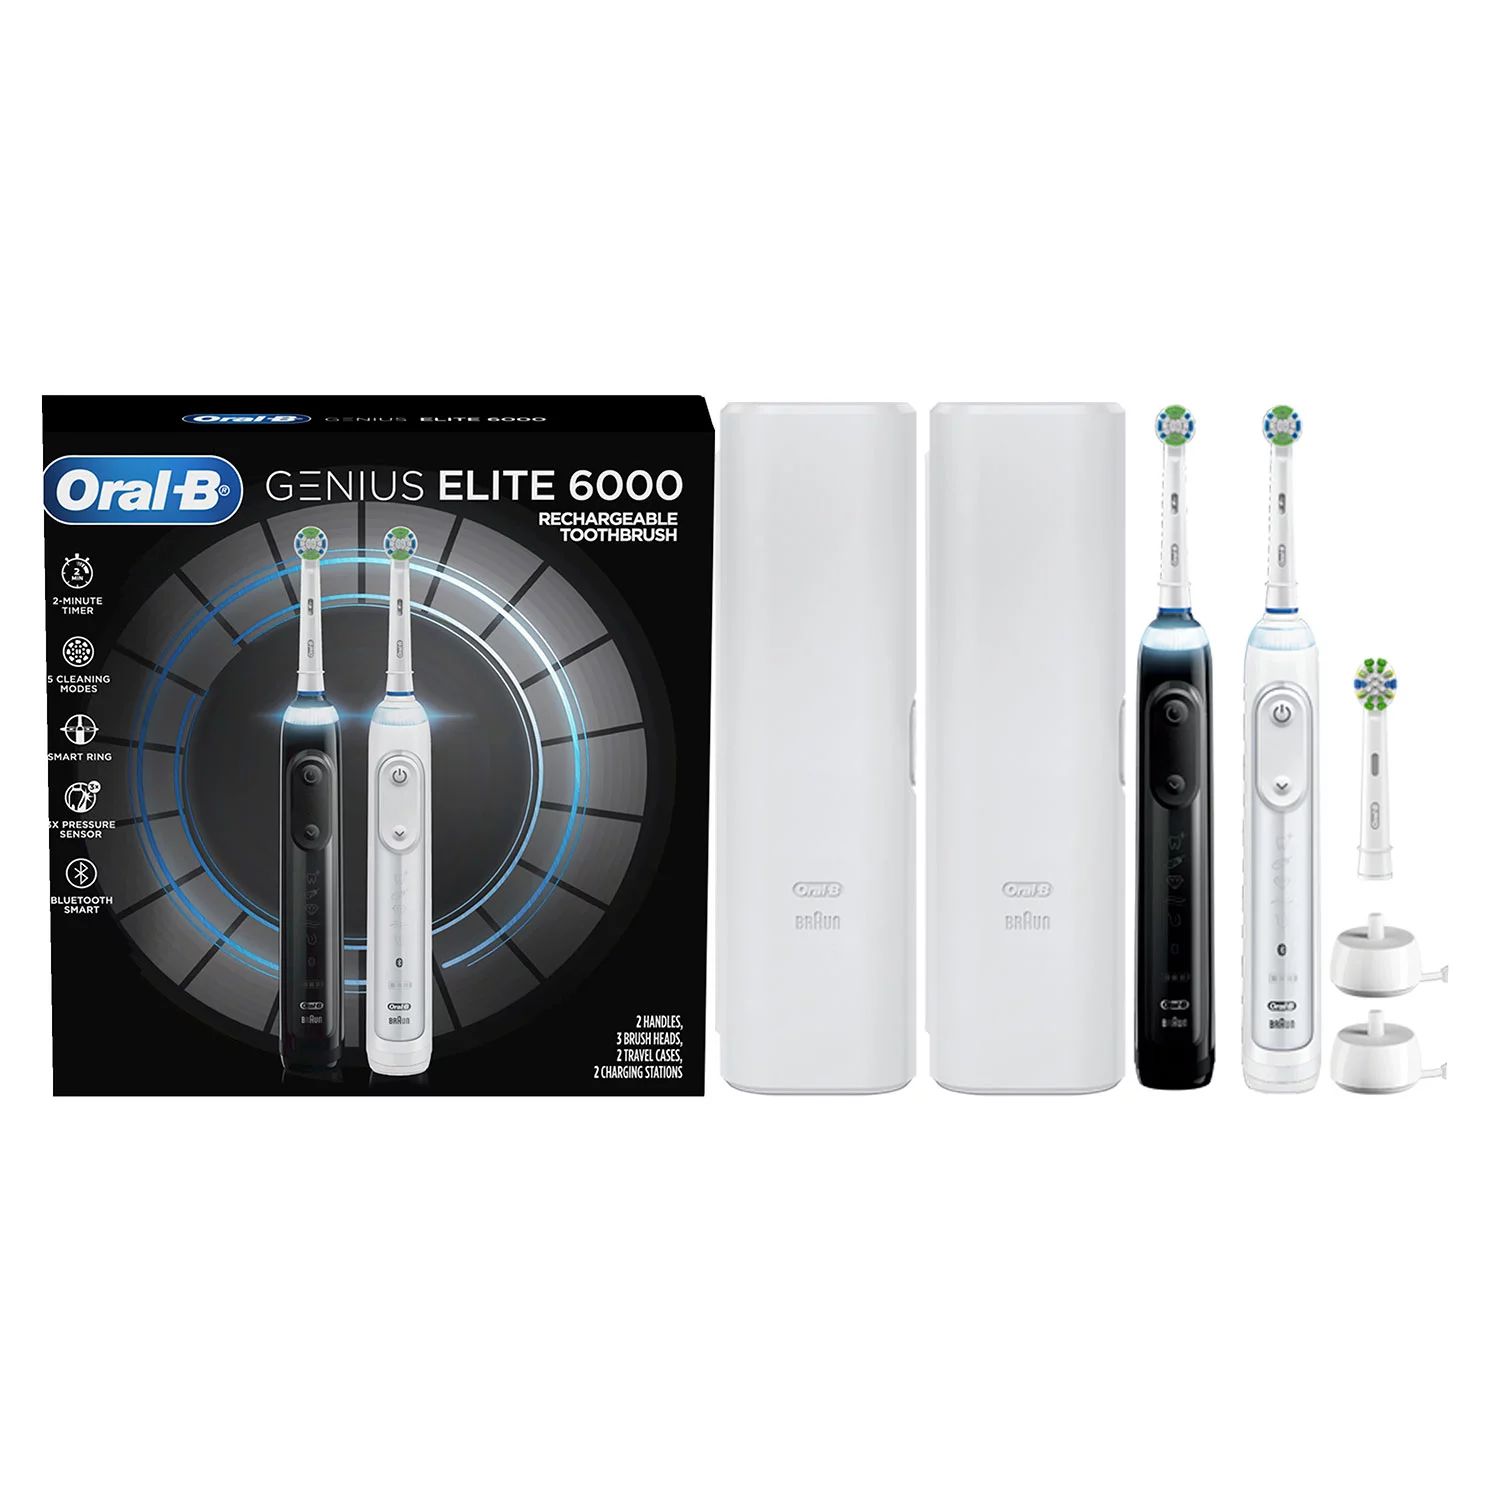 Oral-B Genius Elite 6000 Rechargeable Toothbrush, Powered by Braun, White & Black, Twin Pack | Sam's Club